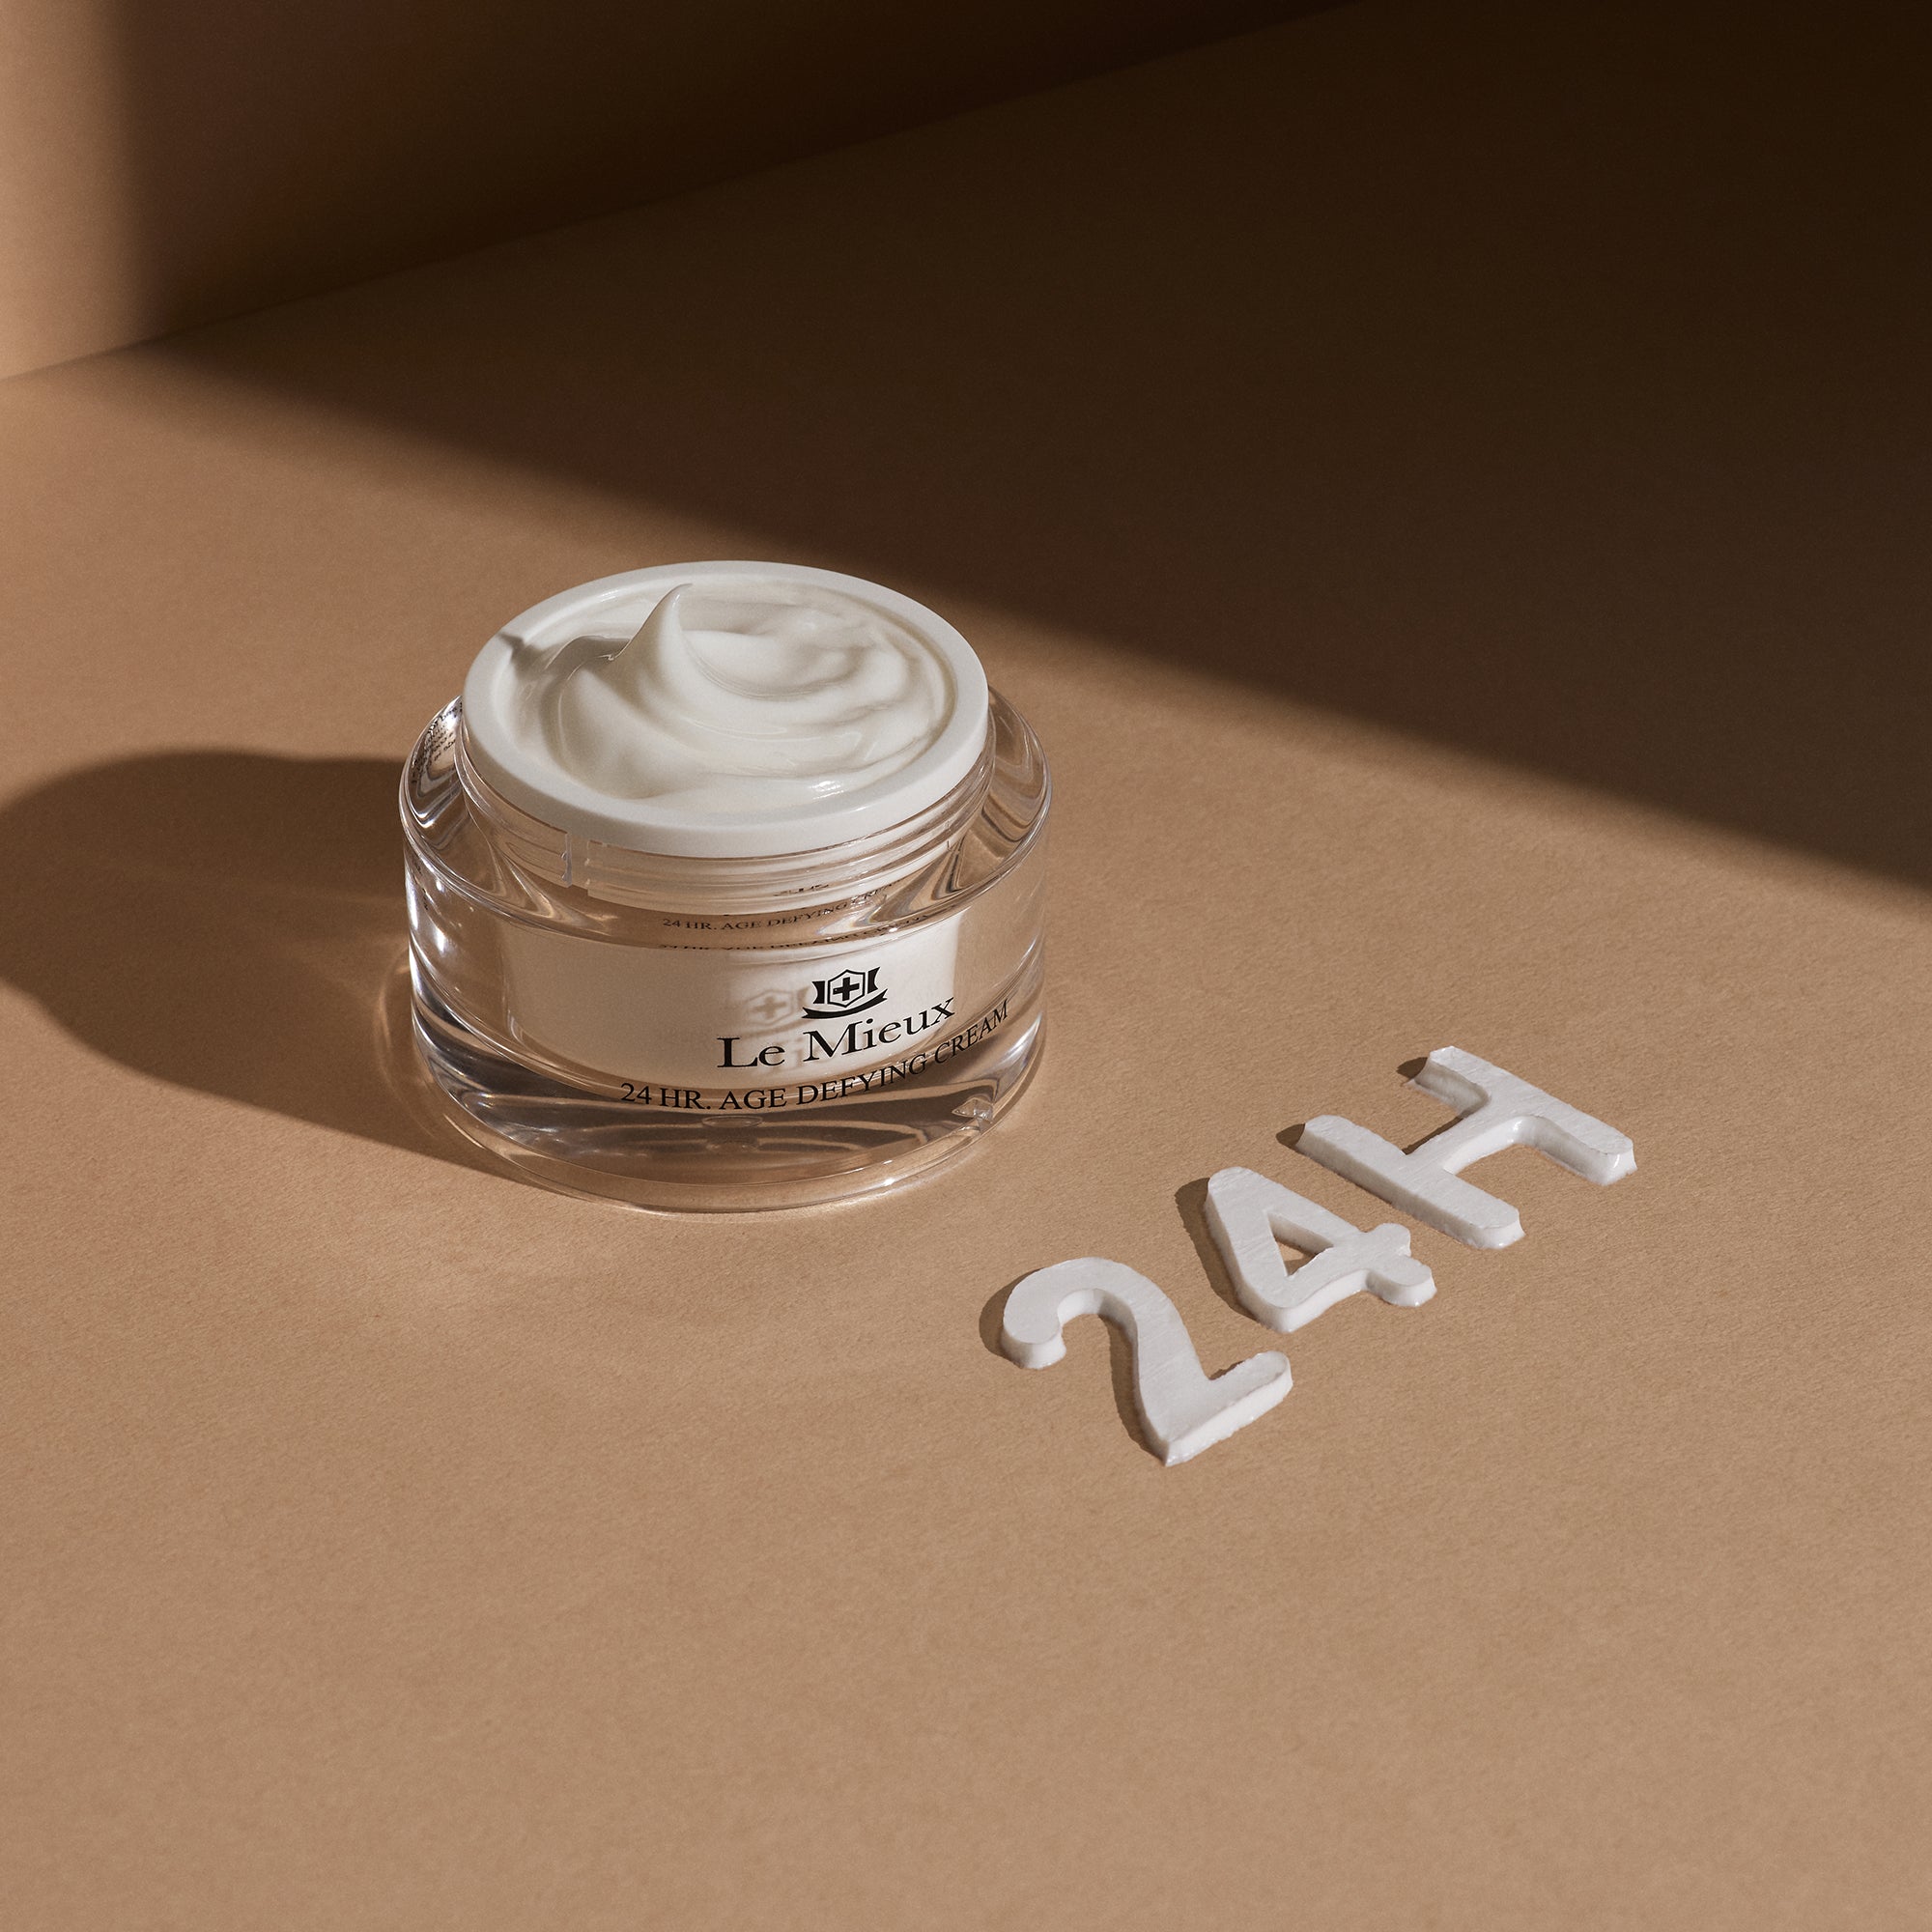  24 HR. AGE DEFYING CREAM from Le Mieux Skincare - 4